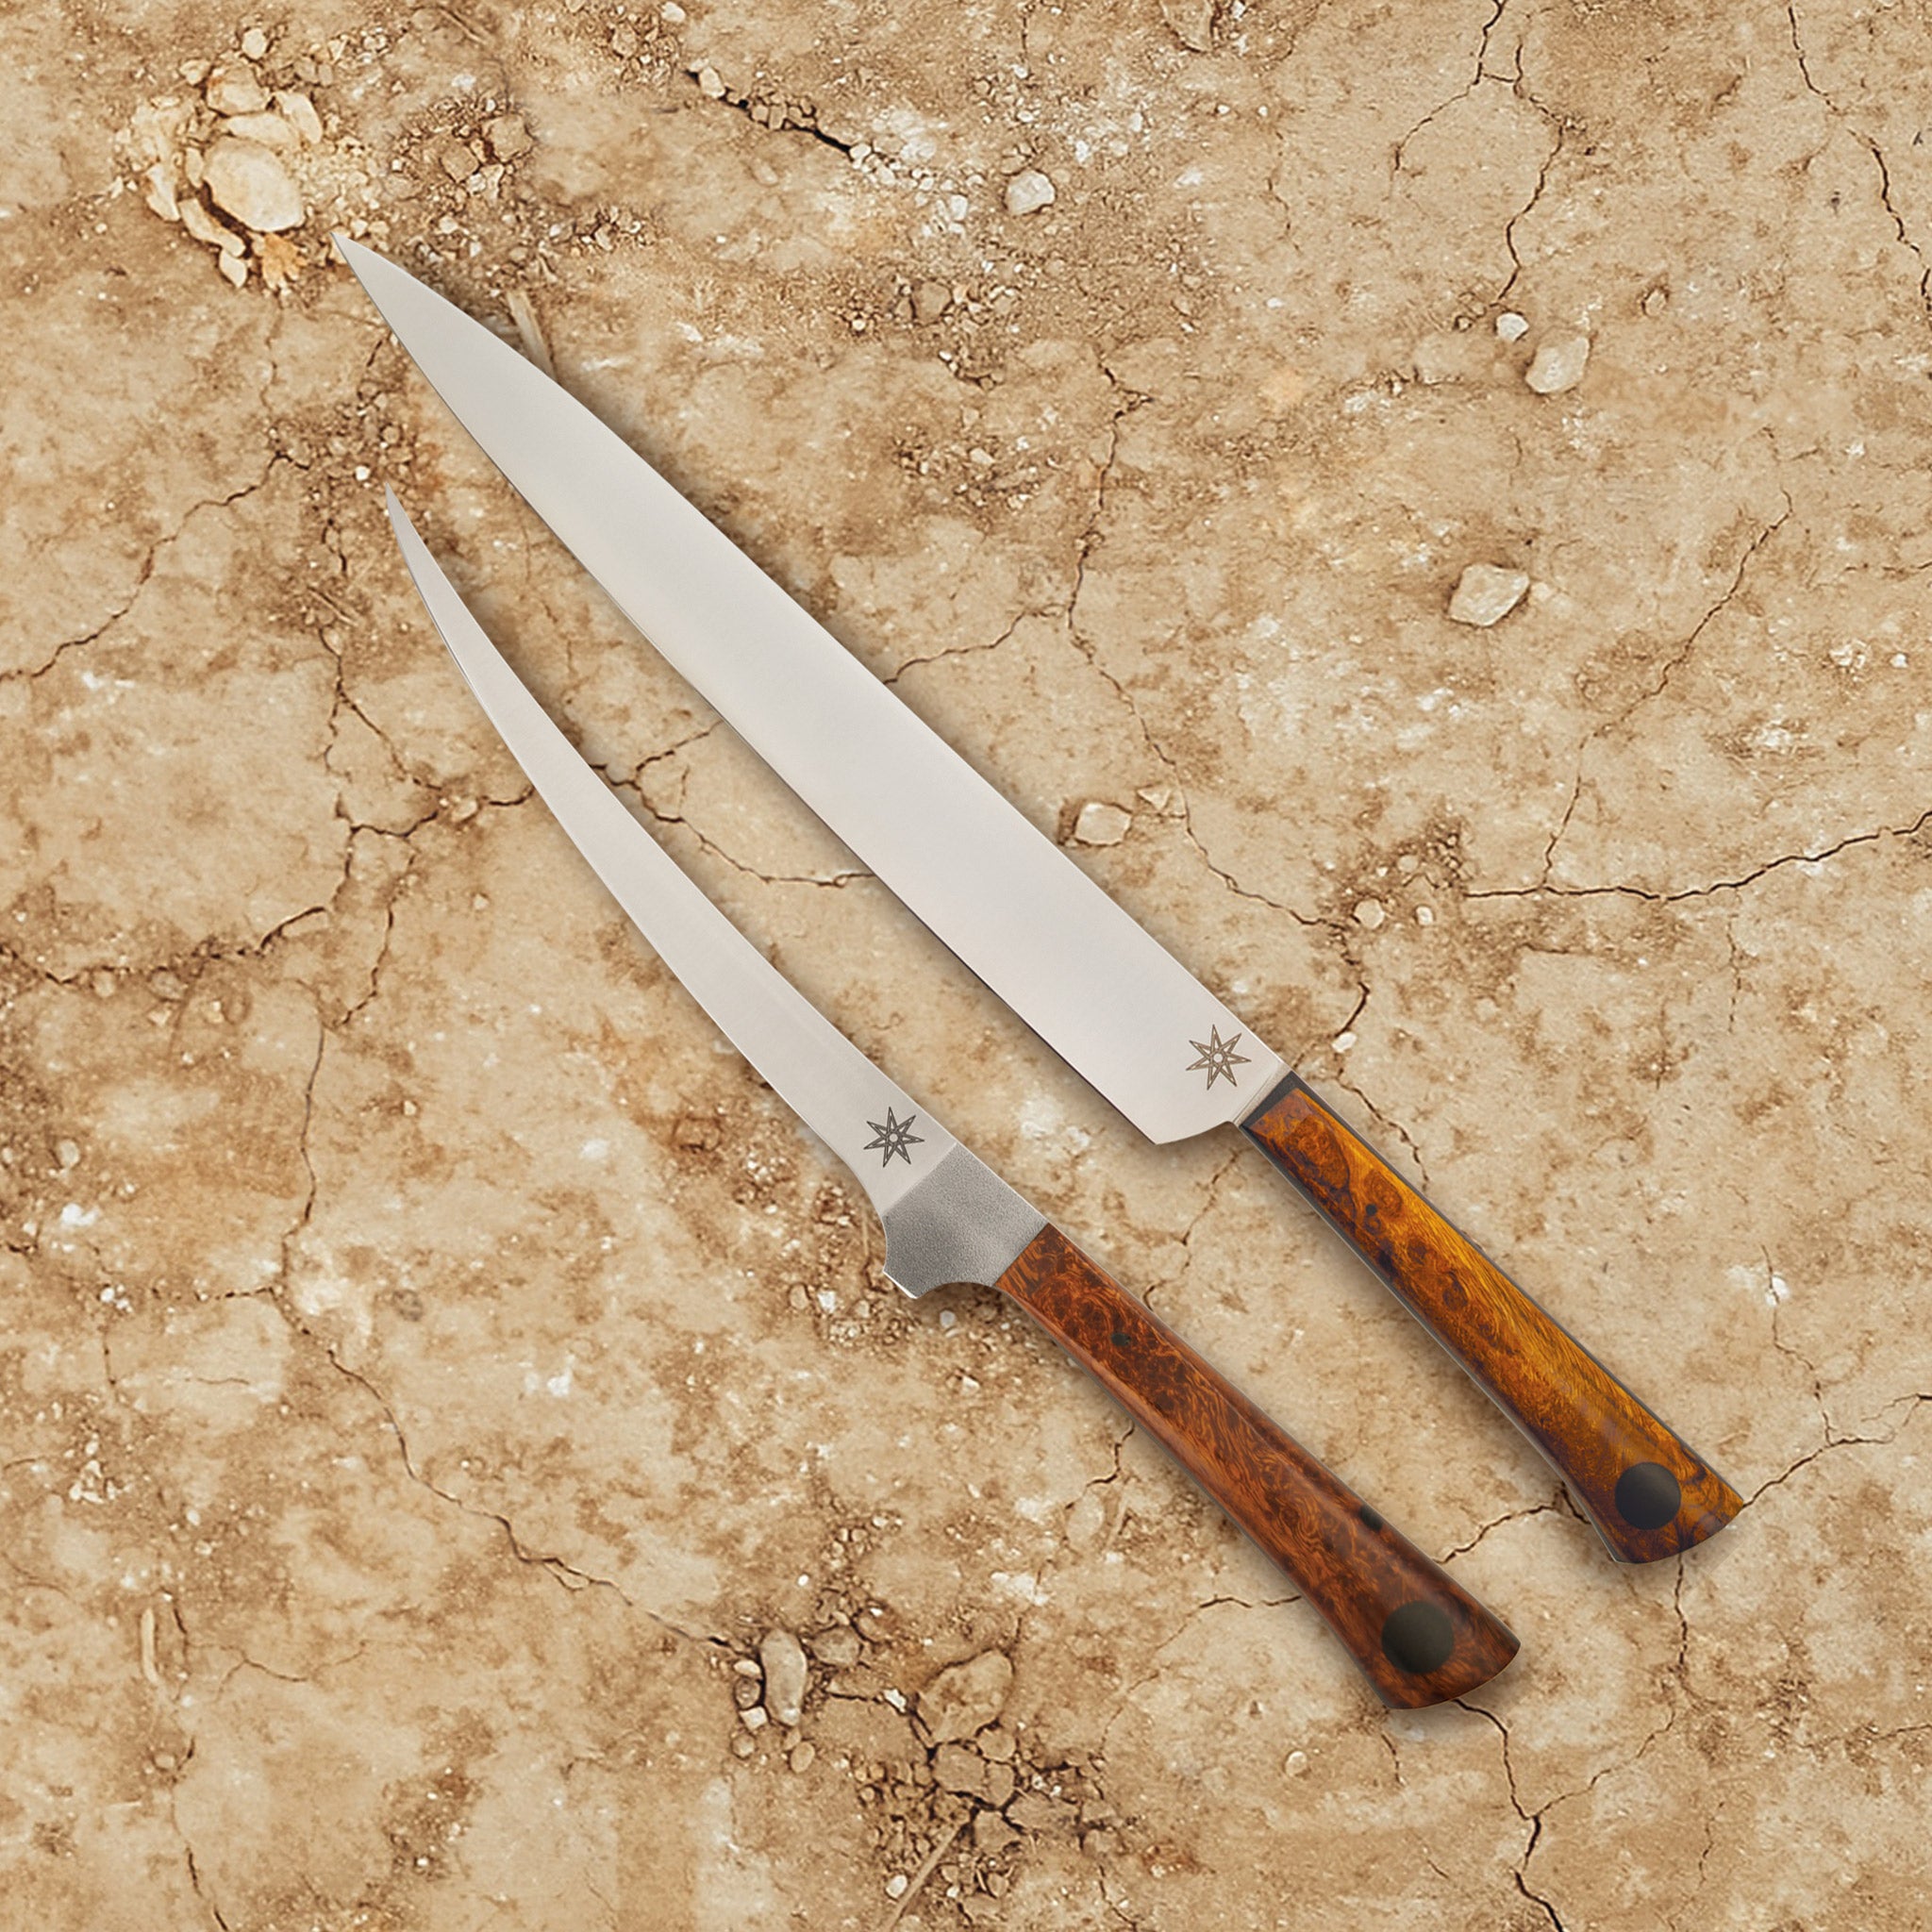 10" stainless steel Slicer and 6" curved boning knives by Town Cutler featuring Olneya Desert Ironwood handle. Sold as set.